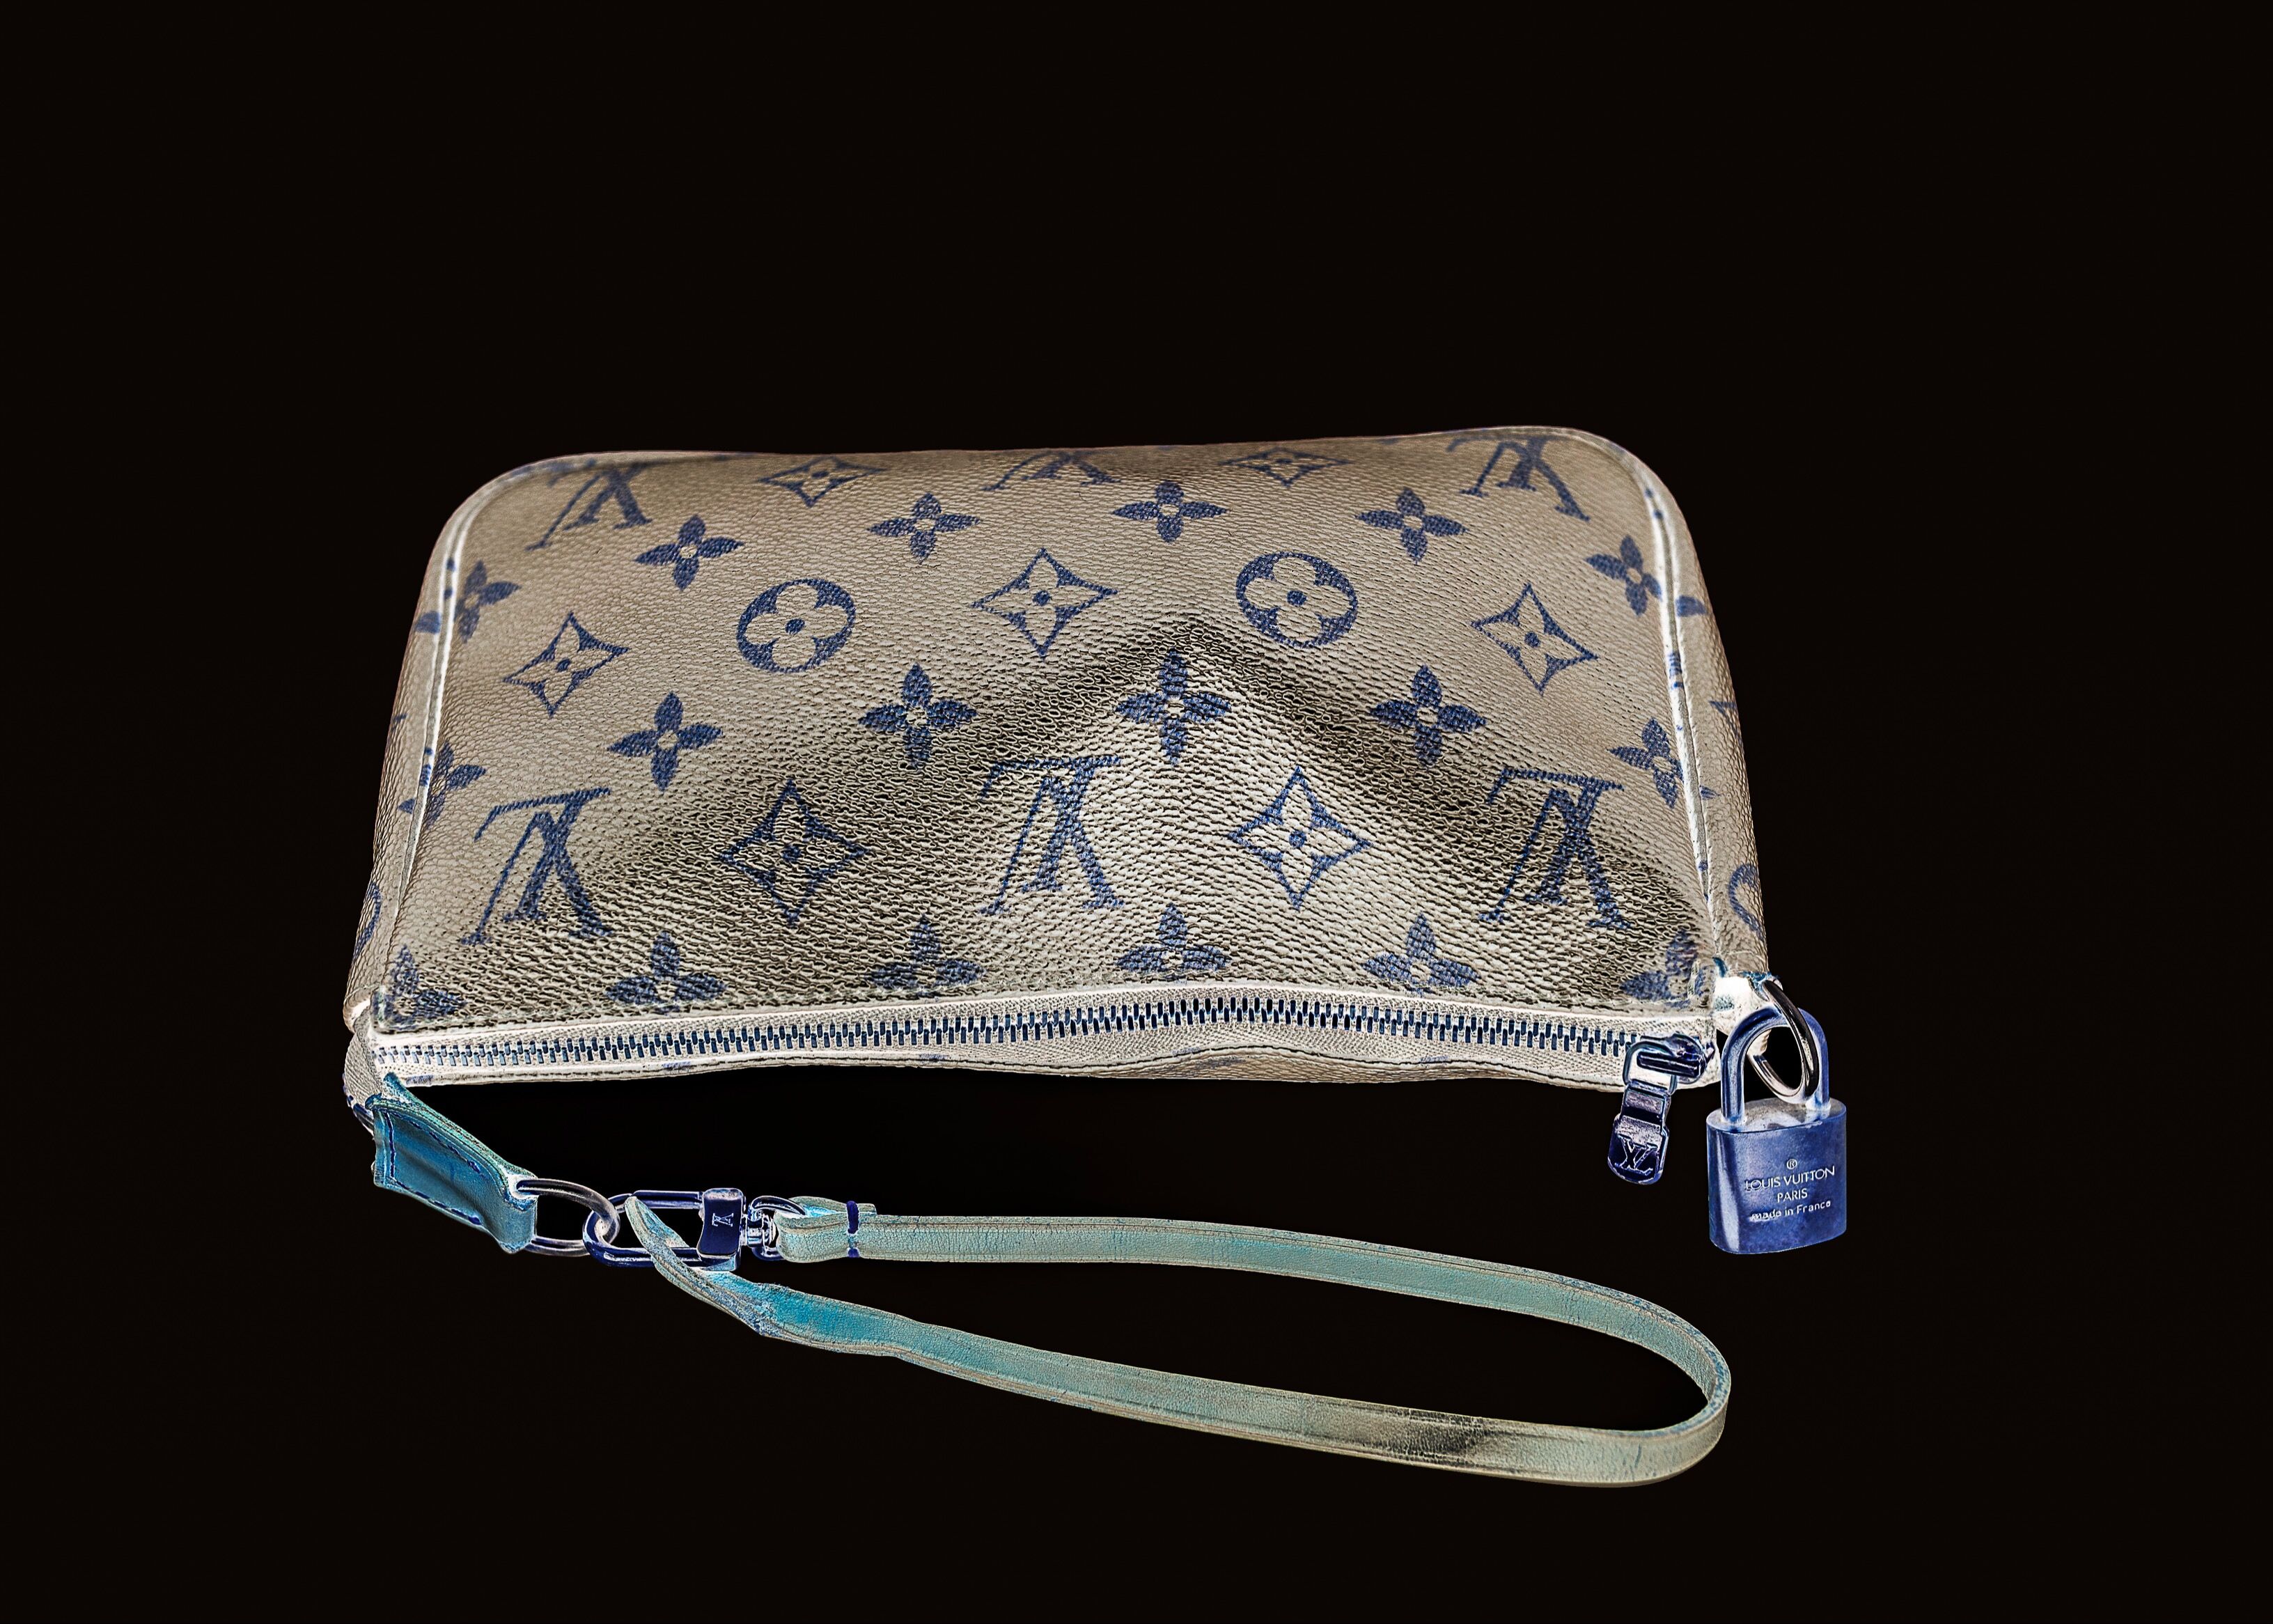 A luxury branded cosmetic pouch with a monogram print and an attached blue padlock, against a black background.